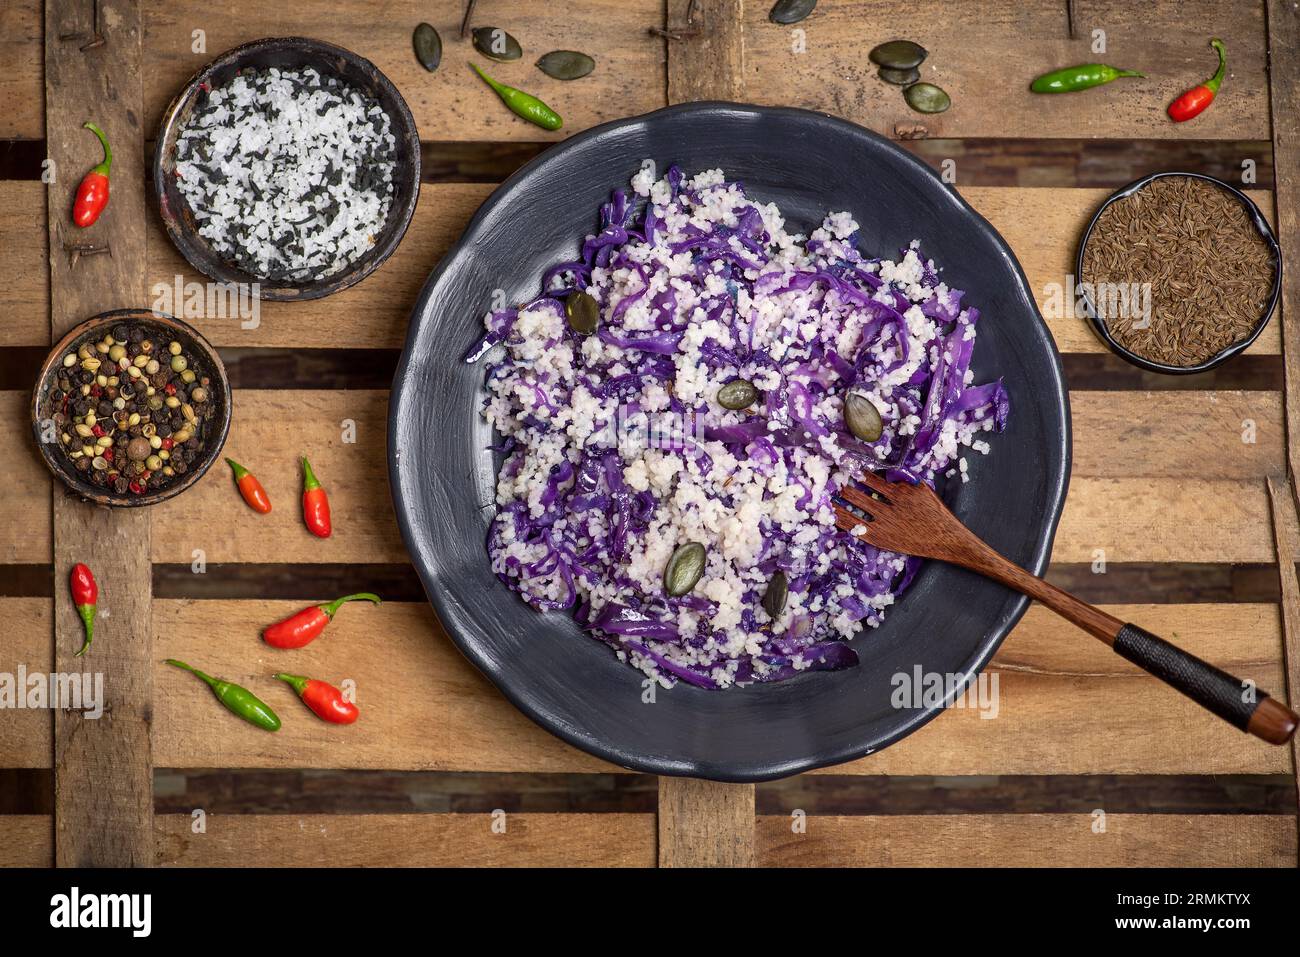 Couscous with red cabbage, fresh and dry spices in a food preparation bowl on a rustic wooden background. Top view Stock Photo